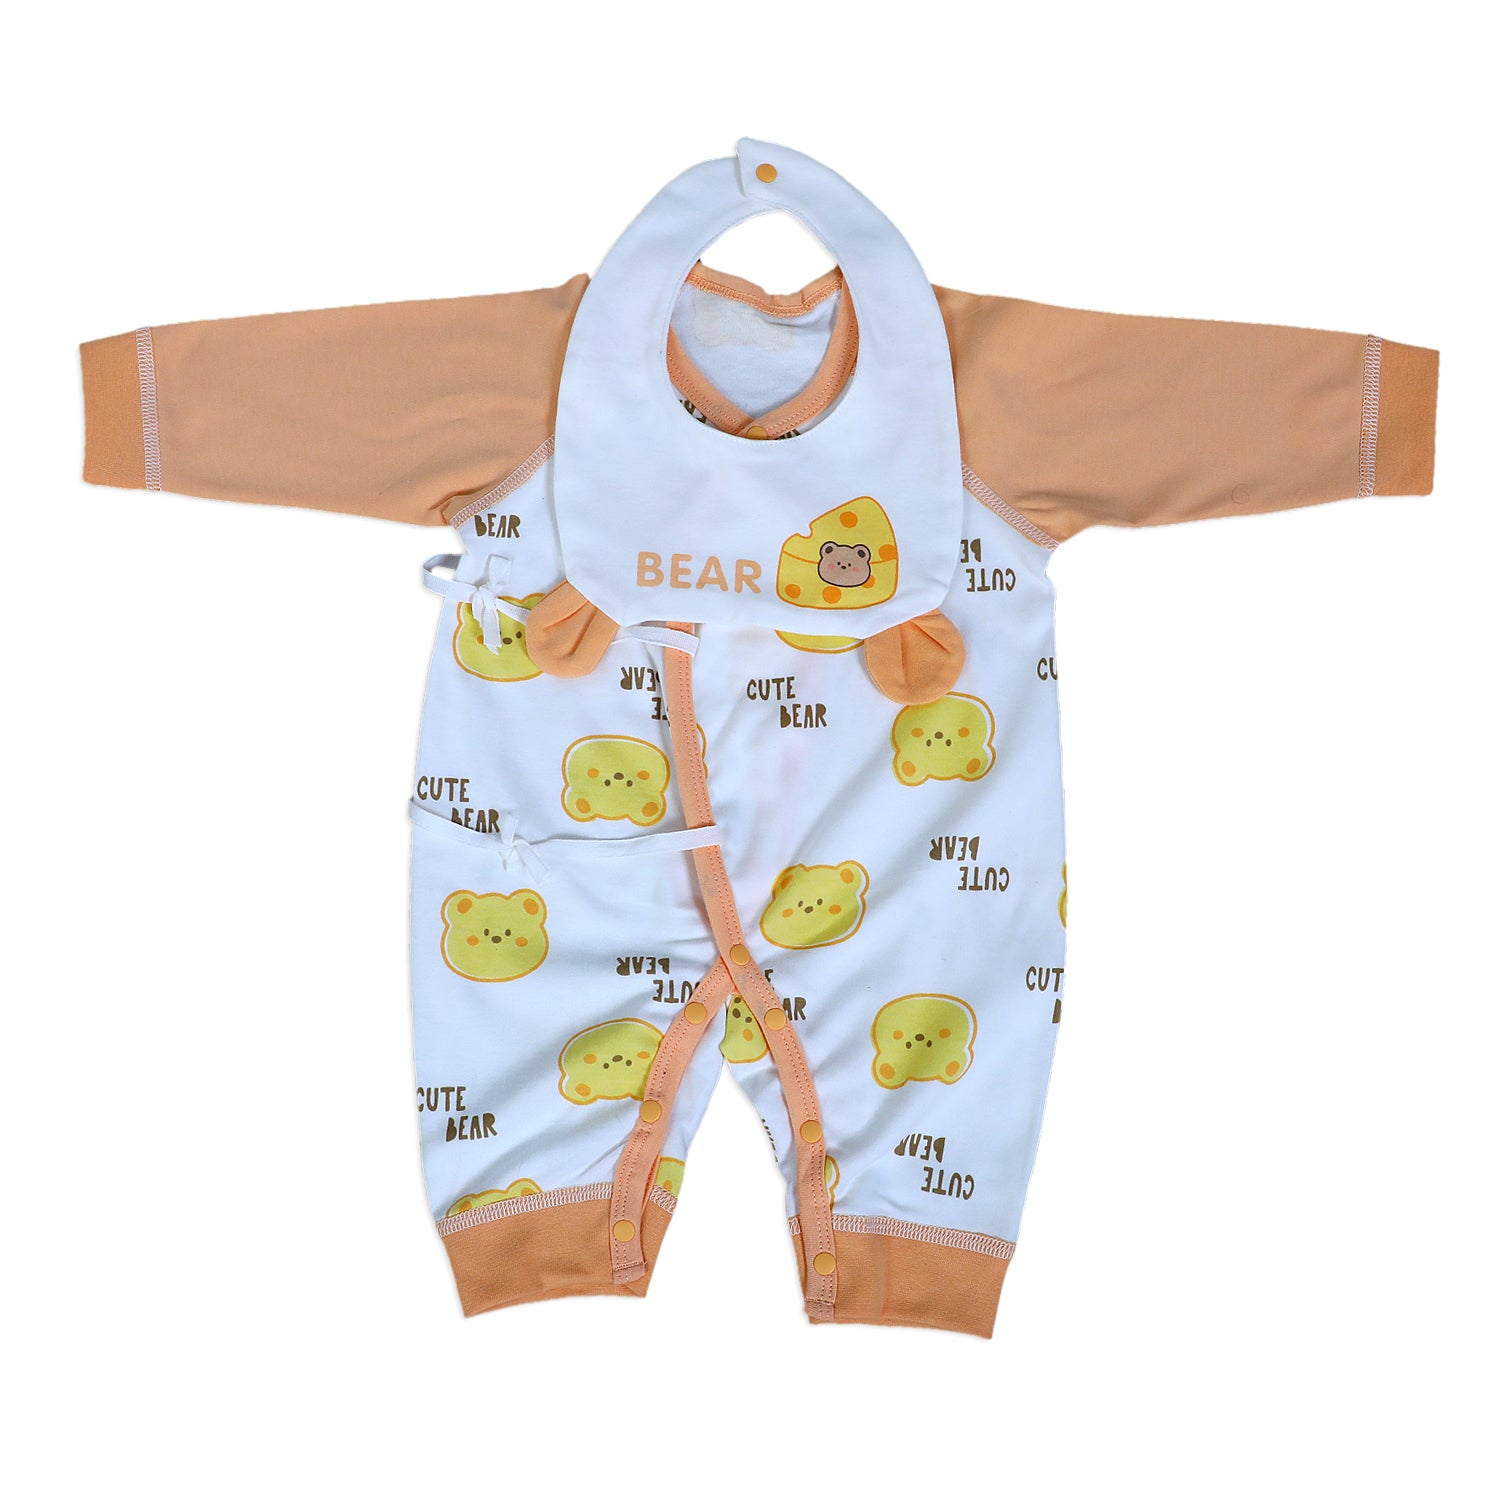 Cute Bear Full Sleeves One-Piece Body Suit With Snap Buttons Tie Knot And Matching Bib - Orange - Baby Moo